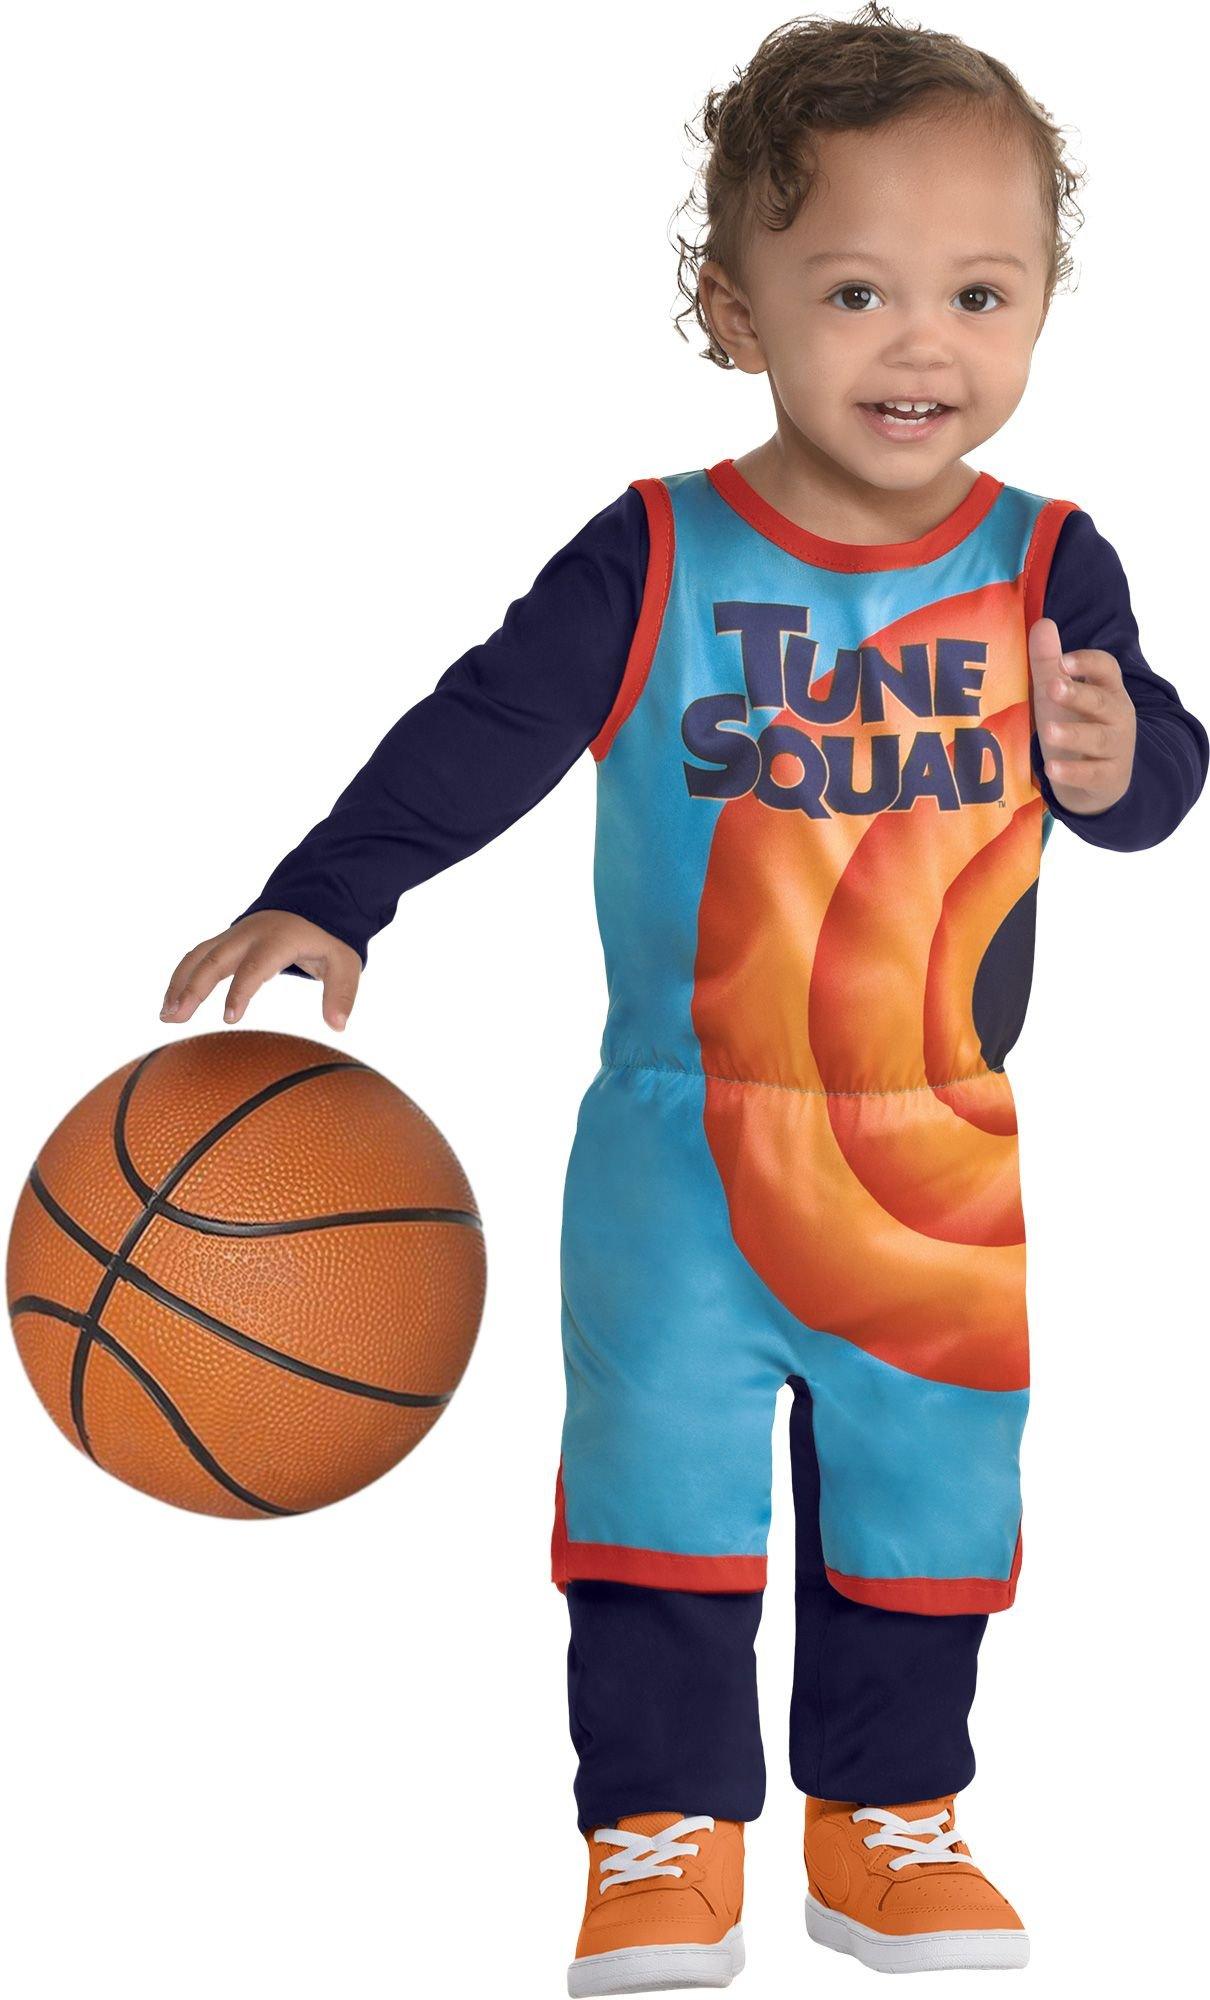 Baby Tune Squad Jersey Costume - Space Jam 2 | Party City